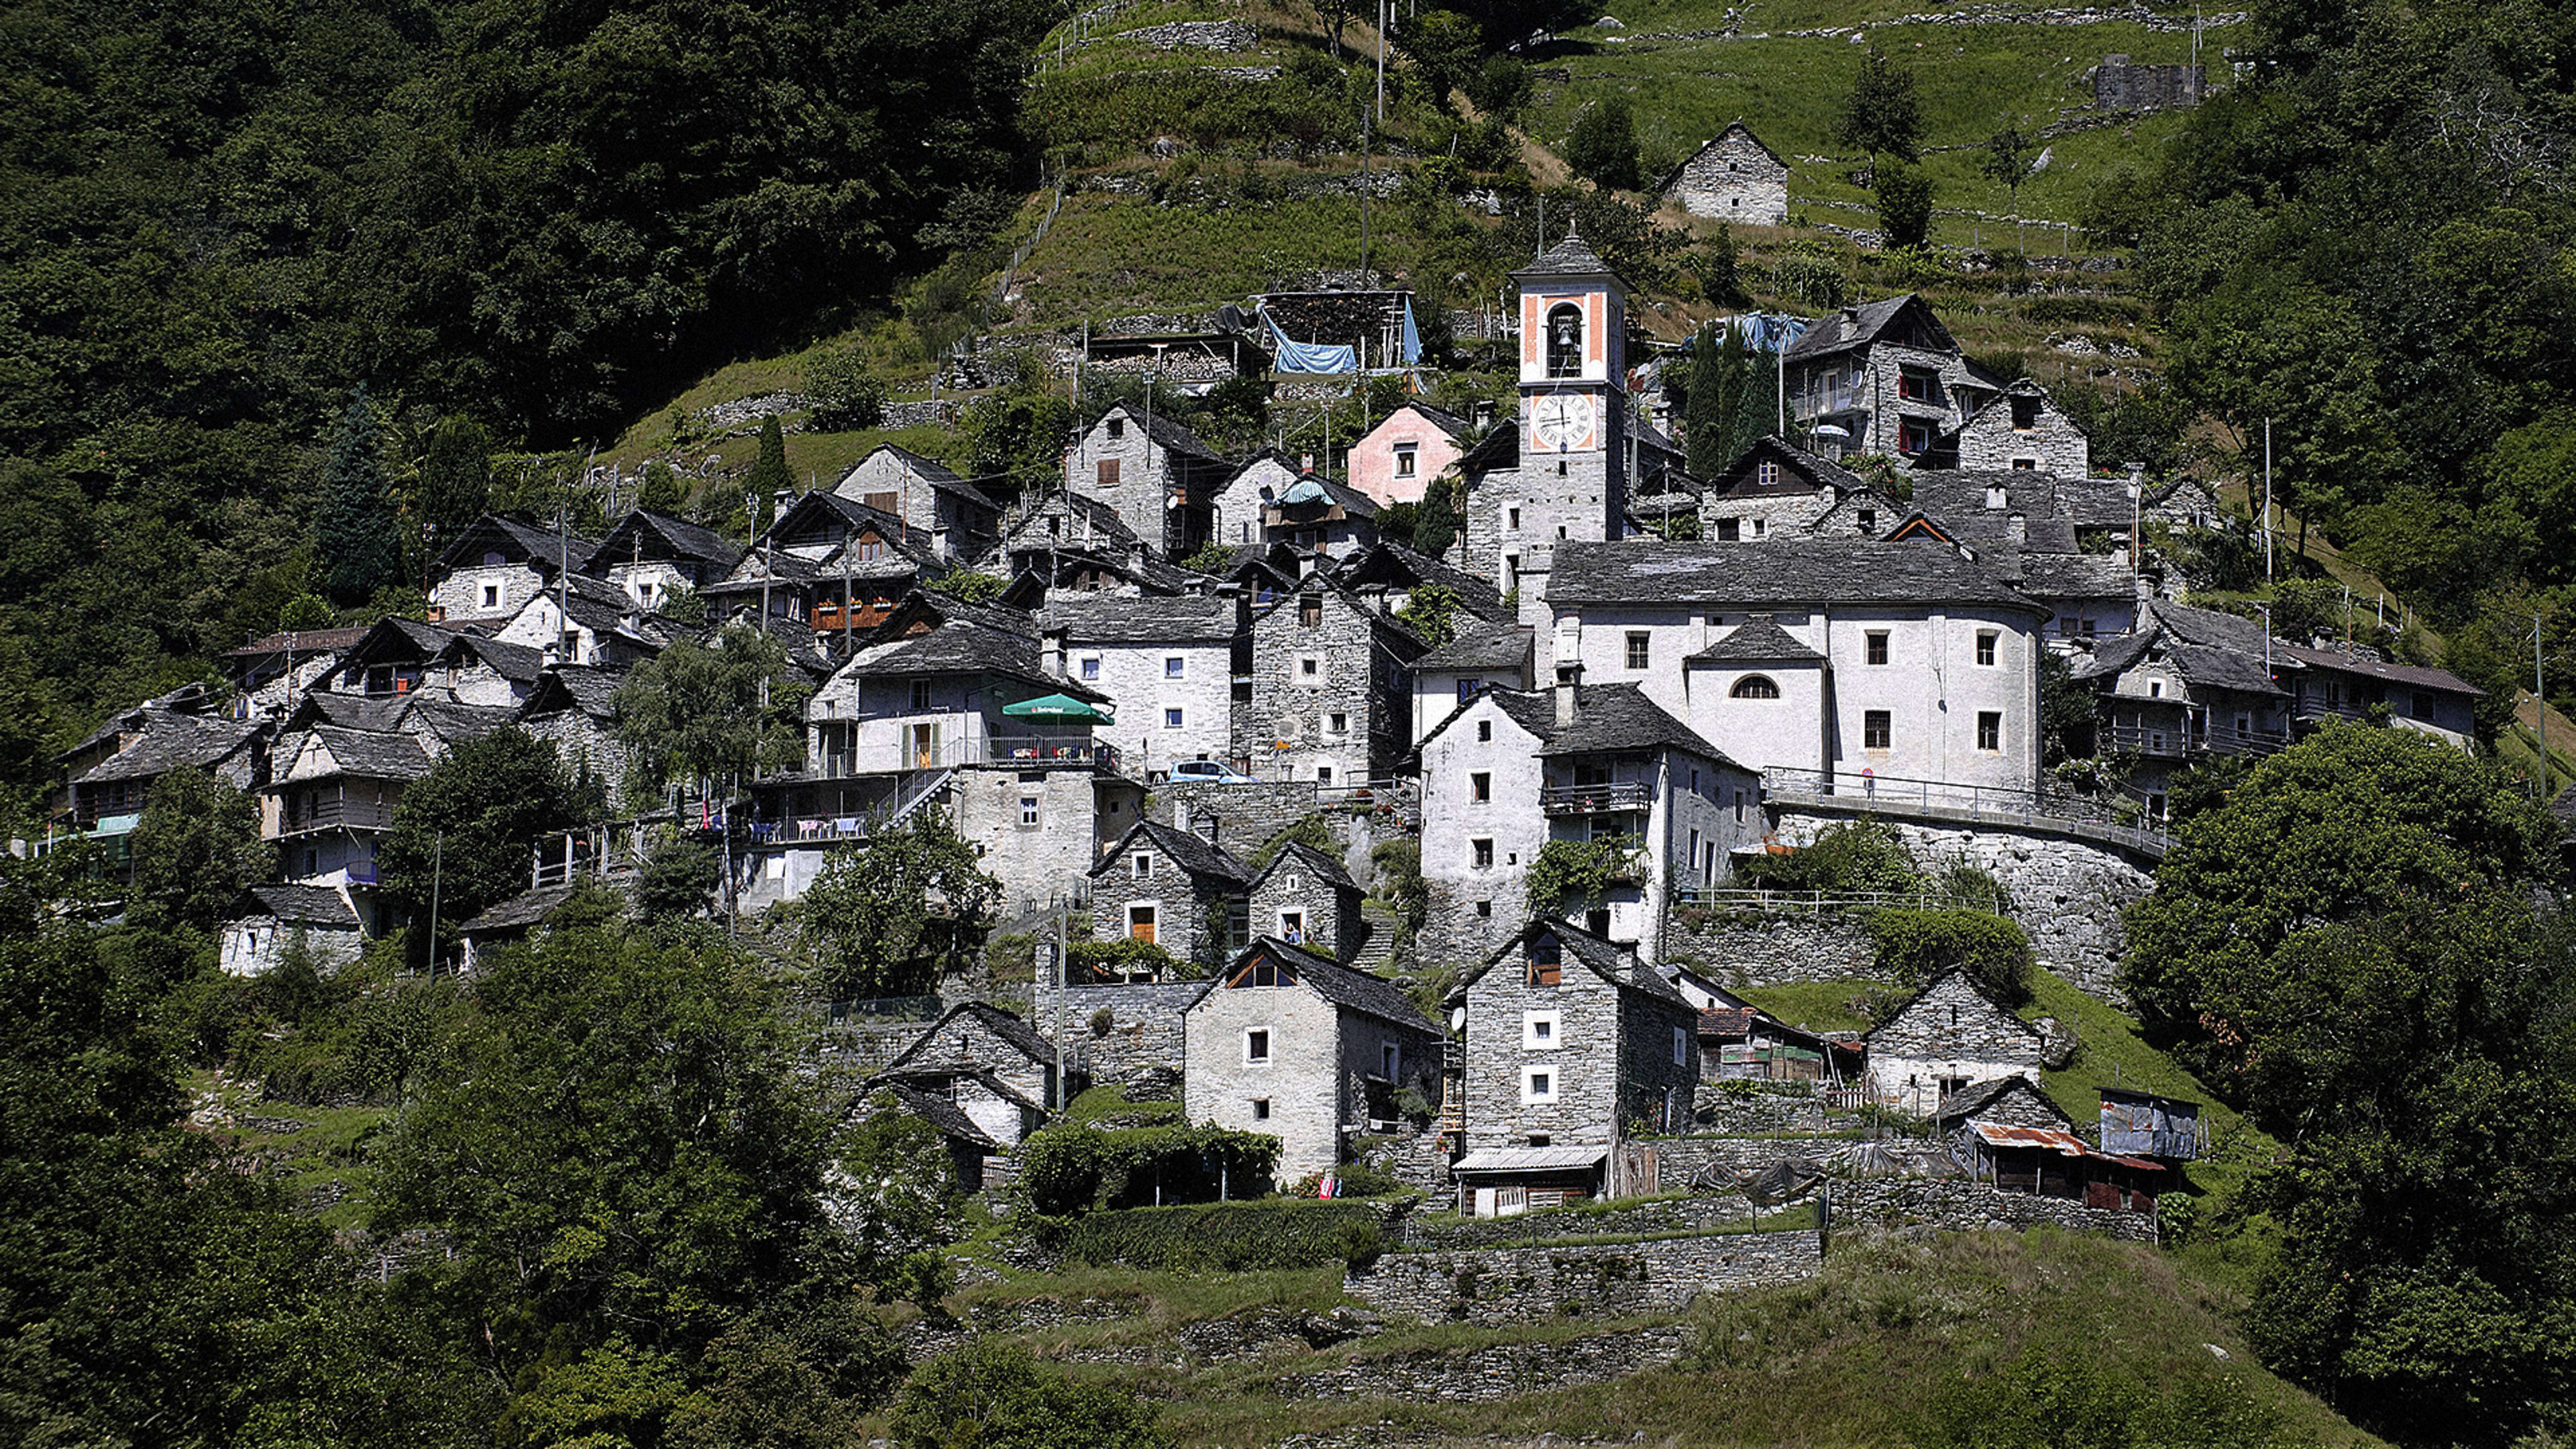 This tiny town in the Alps is turning itself into one big hotel